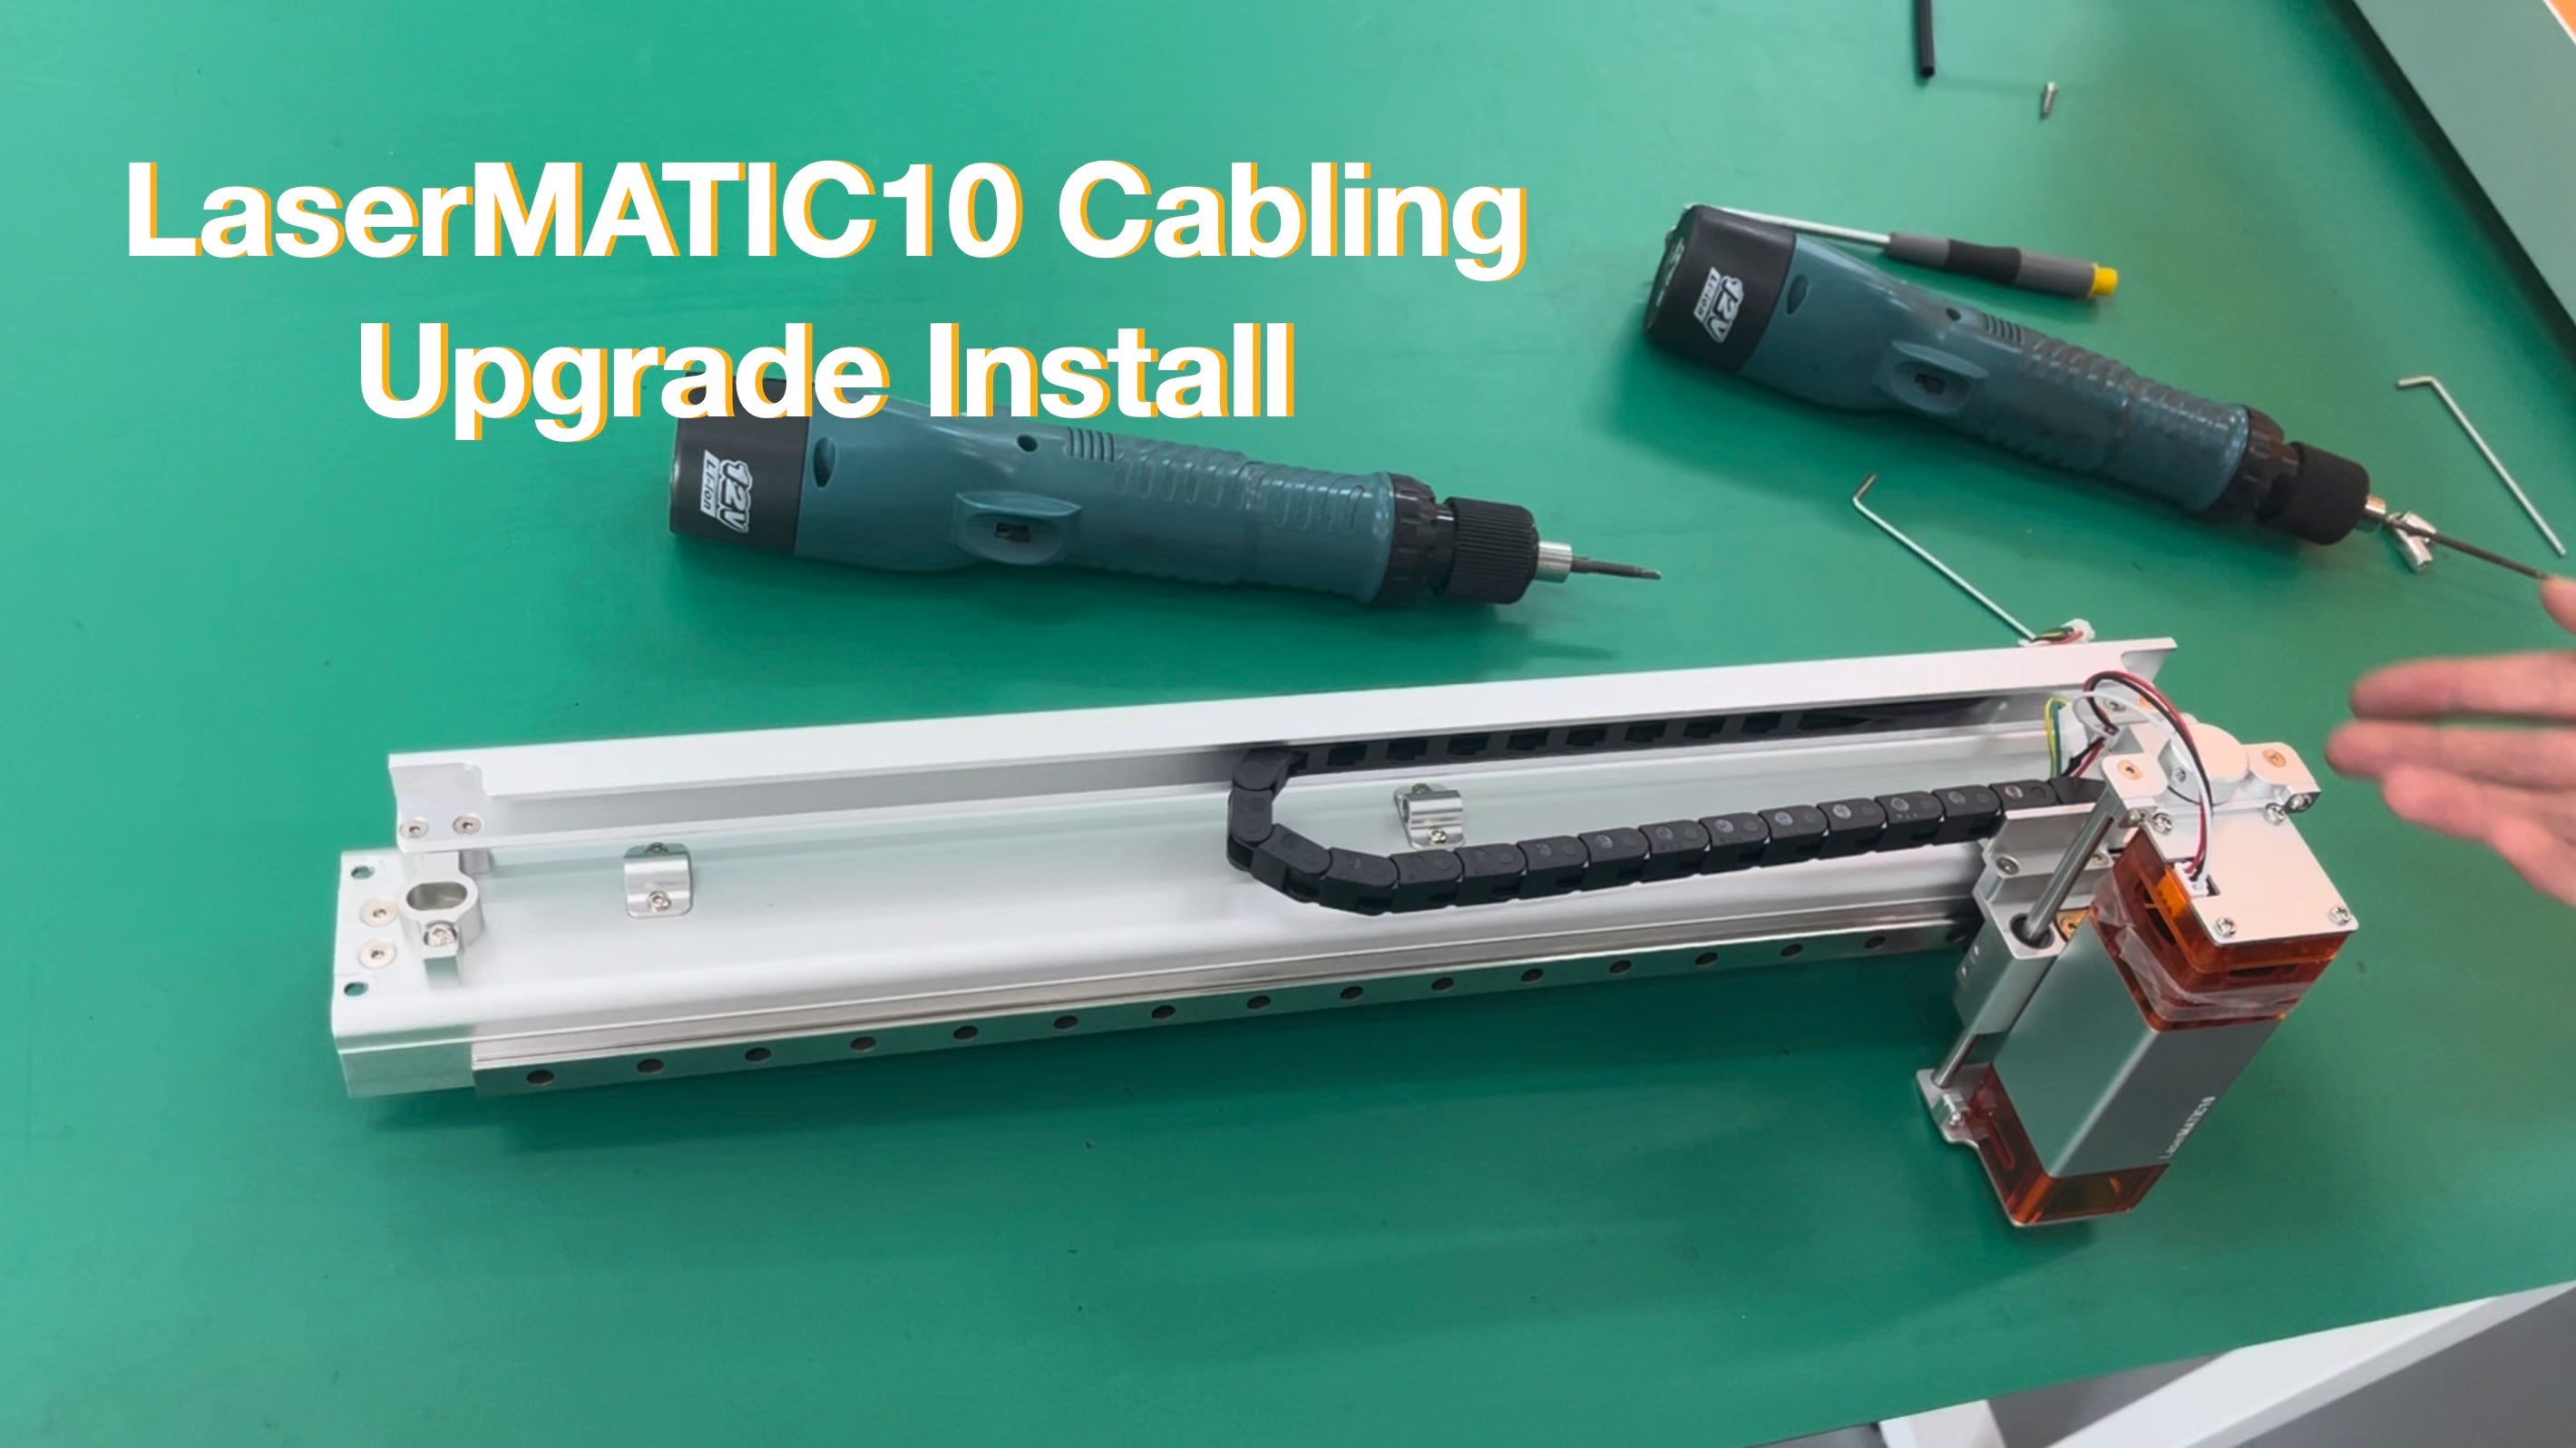 Load video: LaserMATIC10 cabling upgrade installation video